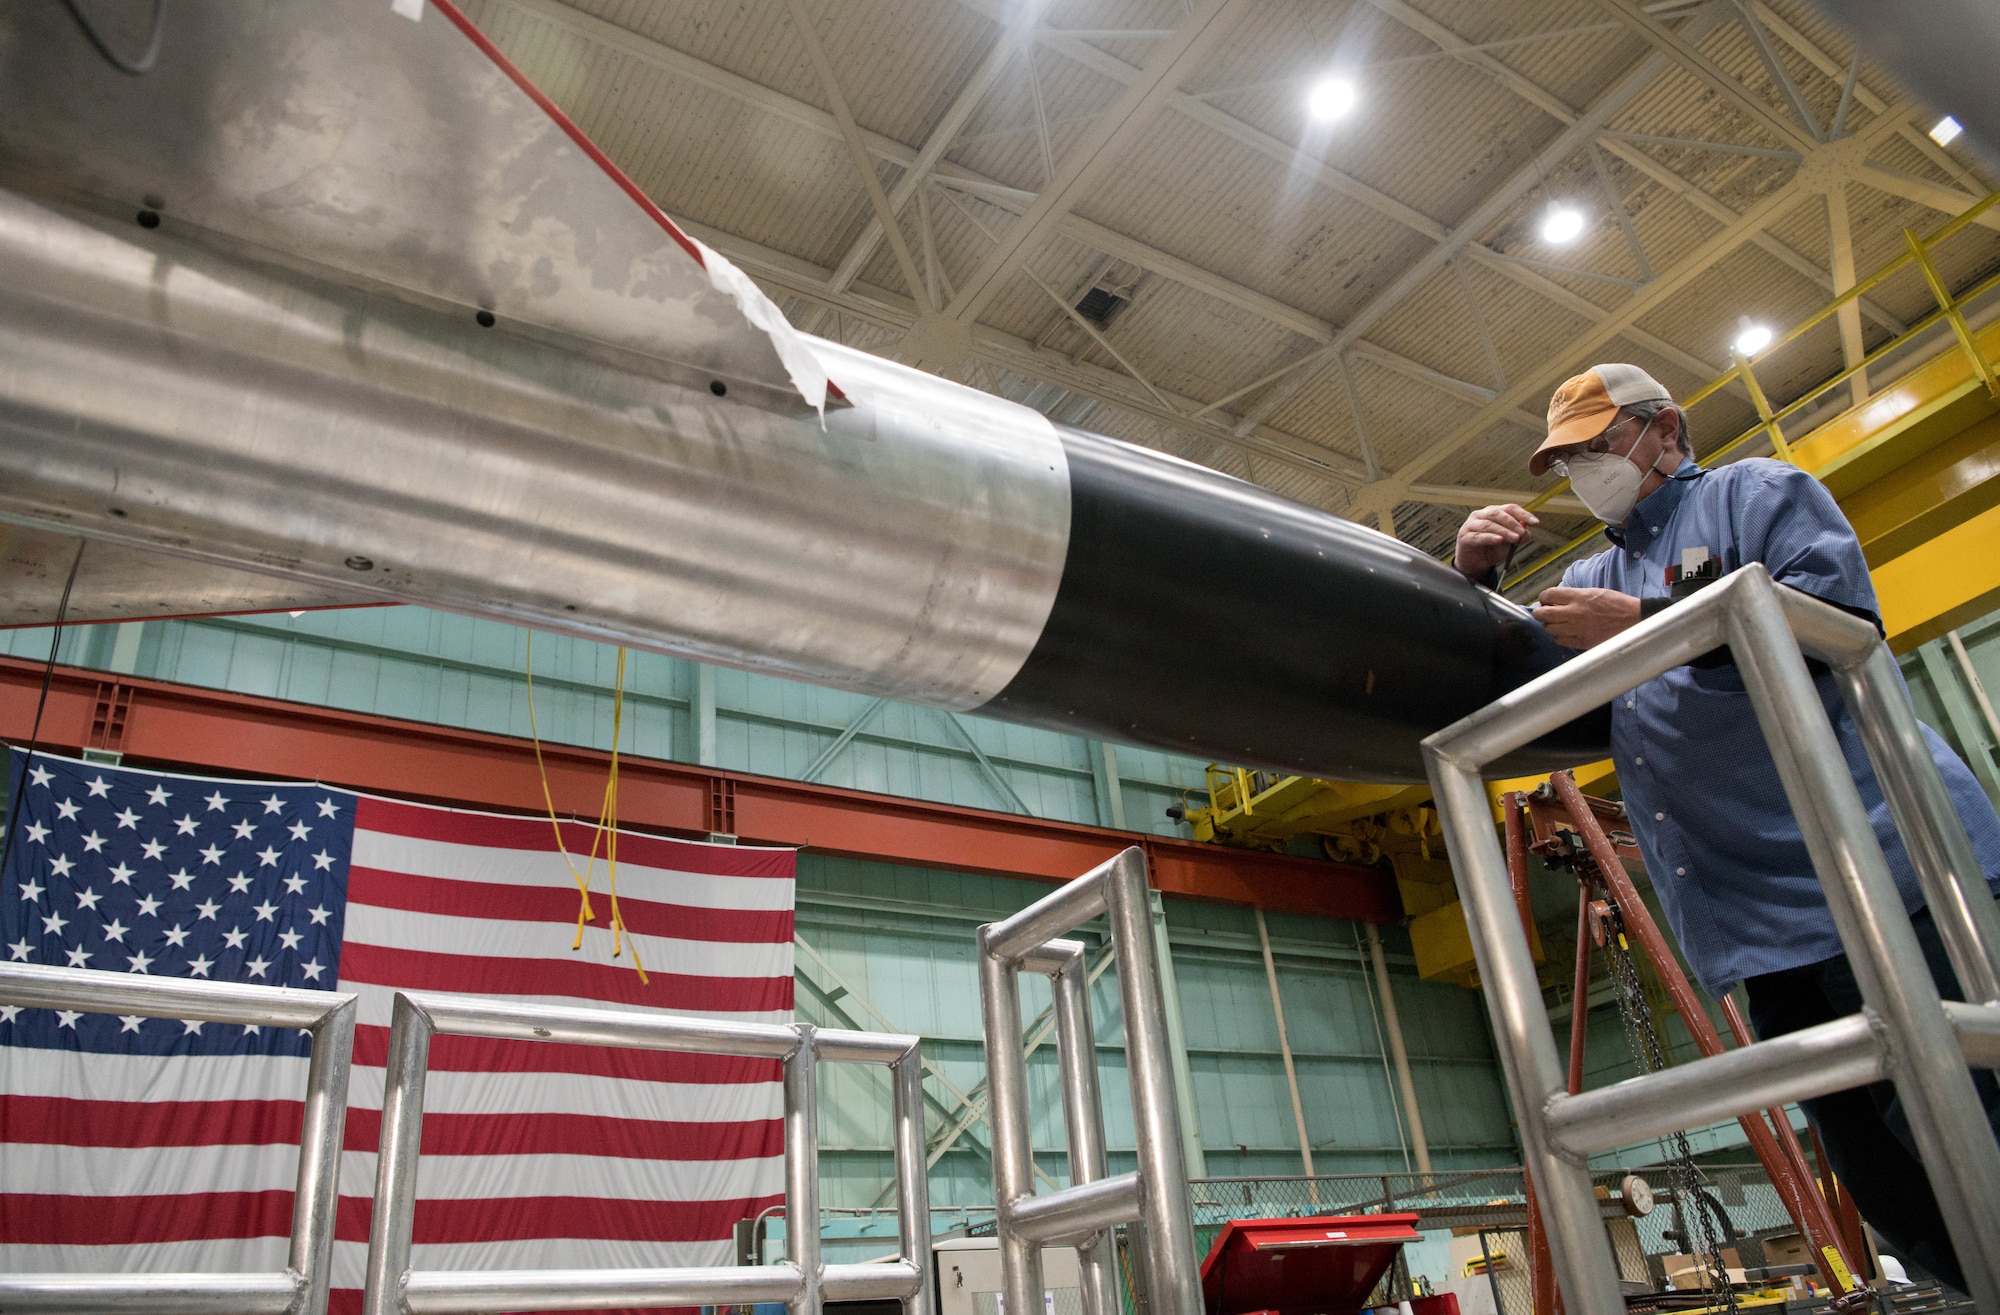 ale McKill, an outside machinist, makes incremental adjustments to an AGARD-B model to ensure the surface is as smooth as possible where access covers are located, Jan. 8, 2021, at Arnold Air Force Base, Tenn. (U.S. Air Force photo by Jill Pickett)